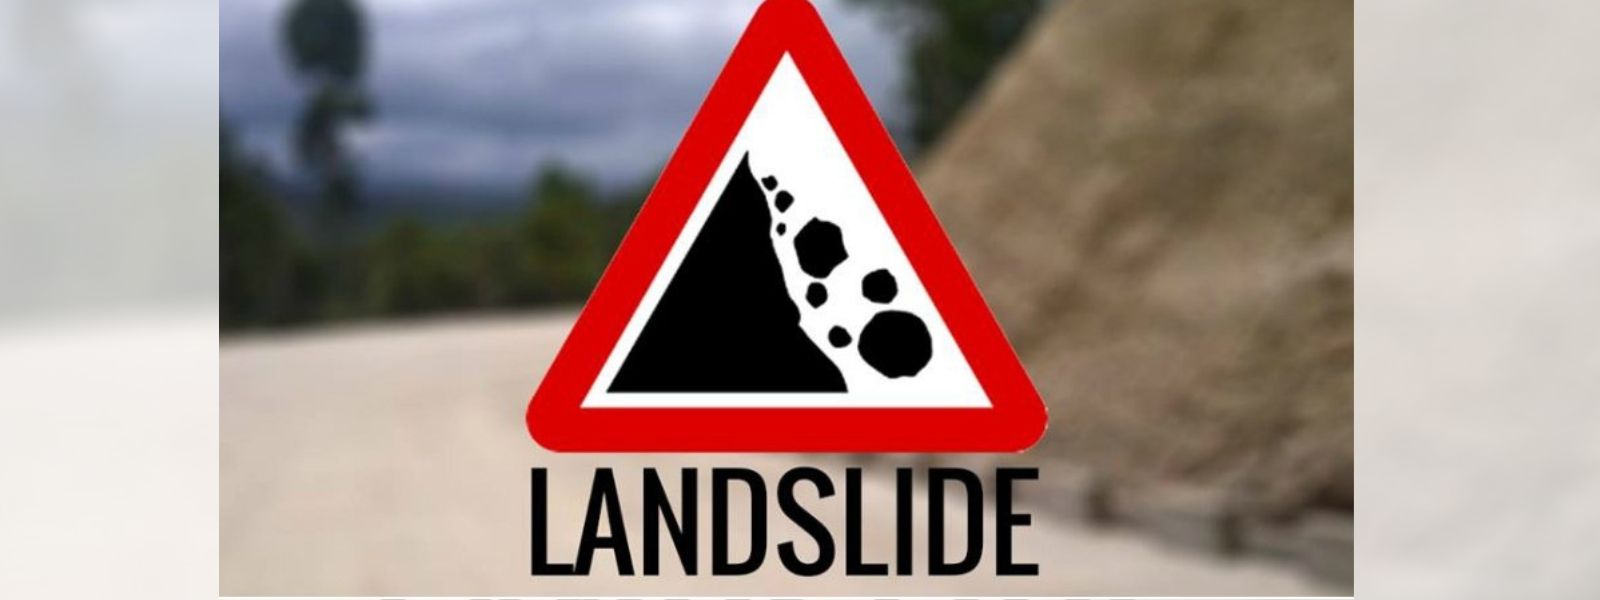 Early landslide warnings issued to 5 districts